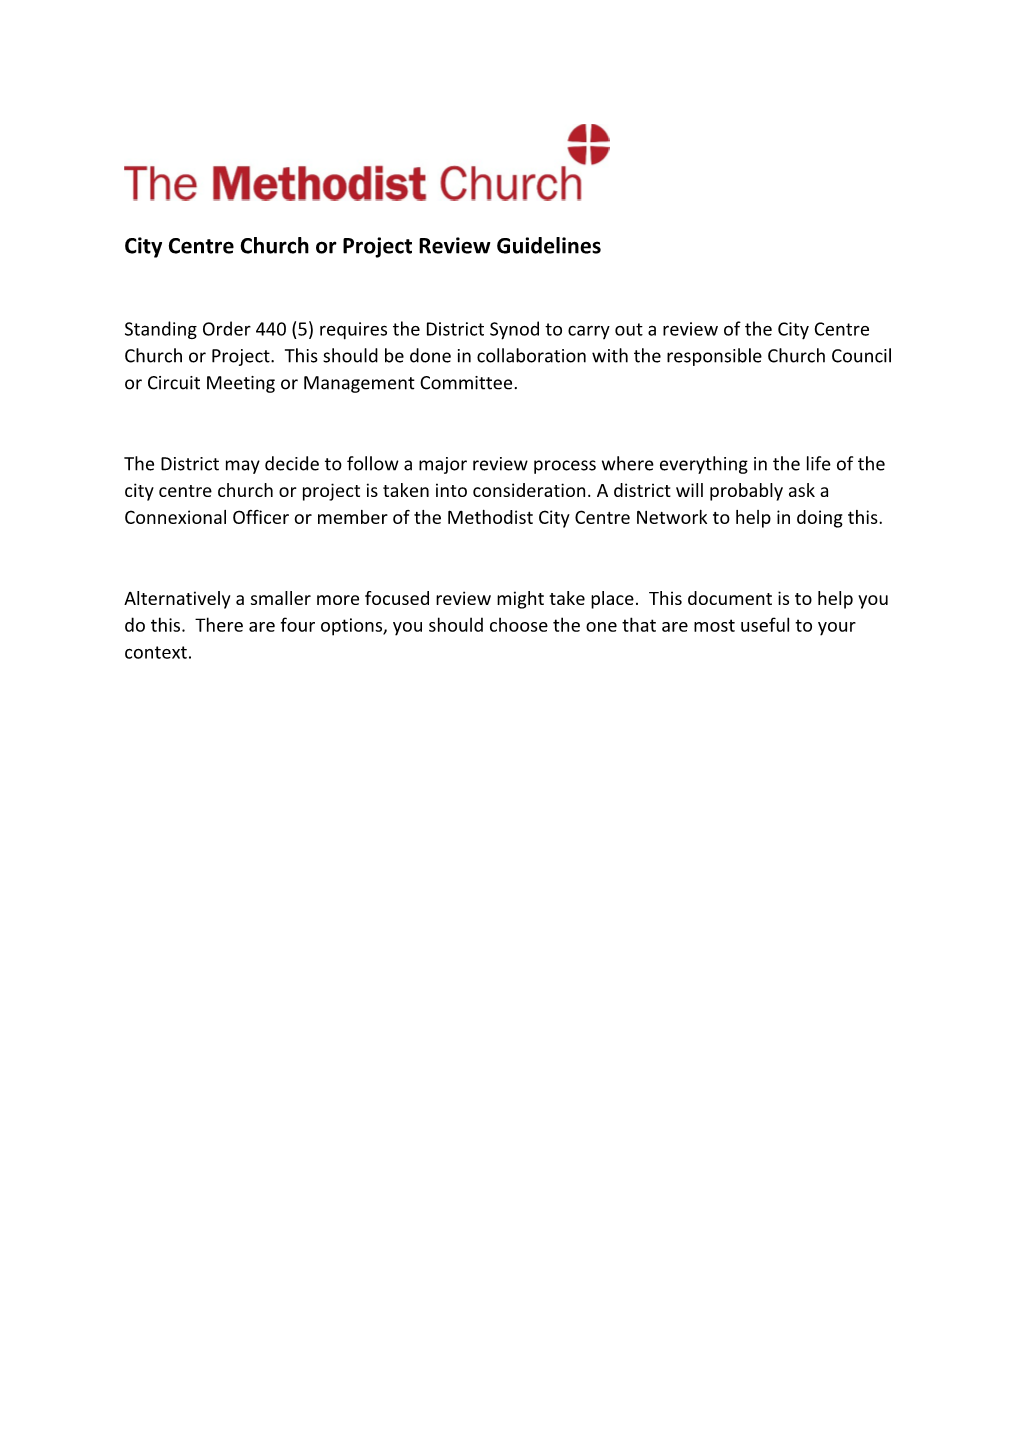 City Centre Church Or Project Review Guidelines